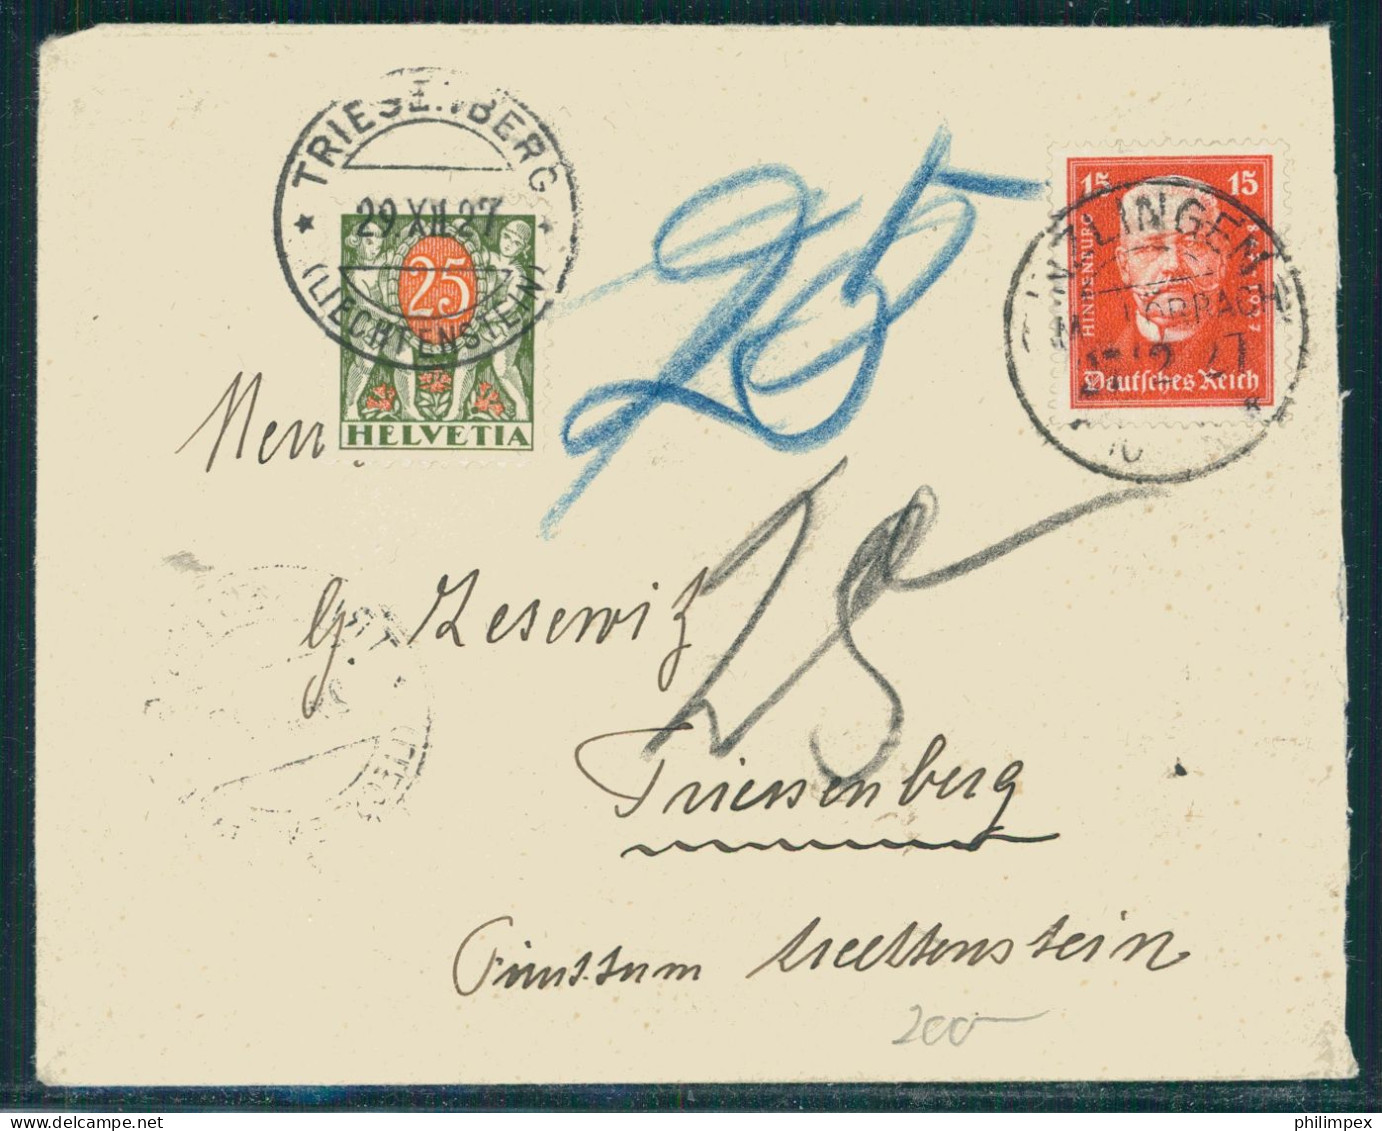 LIECHTENSTEIN, SWISS POSTAGE DUE 25 CENTIMES ON UNDERFRANKED COVER FROM GERMANY- Rare! - Taxe